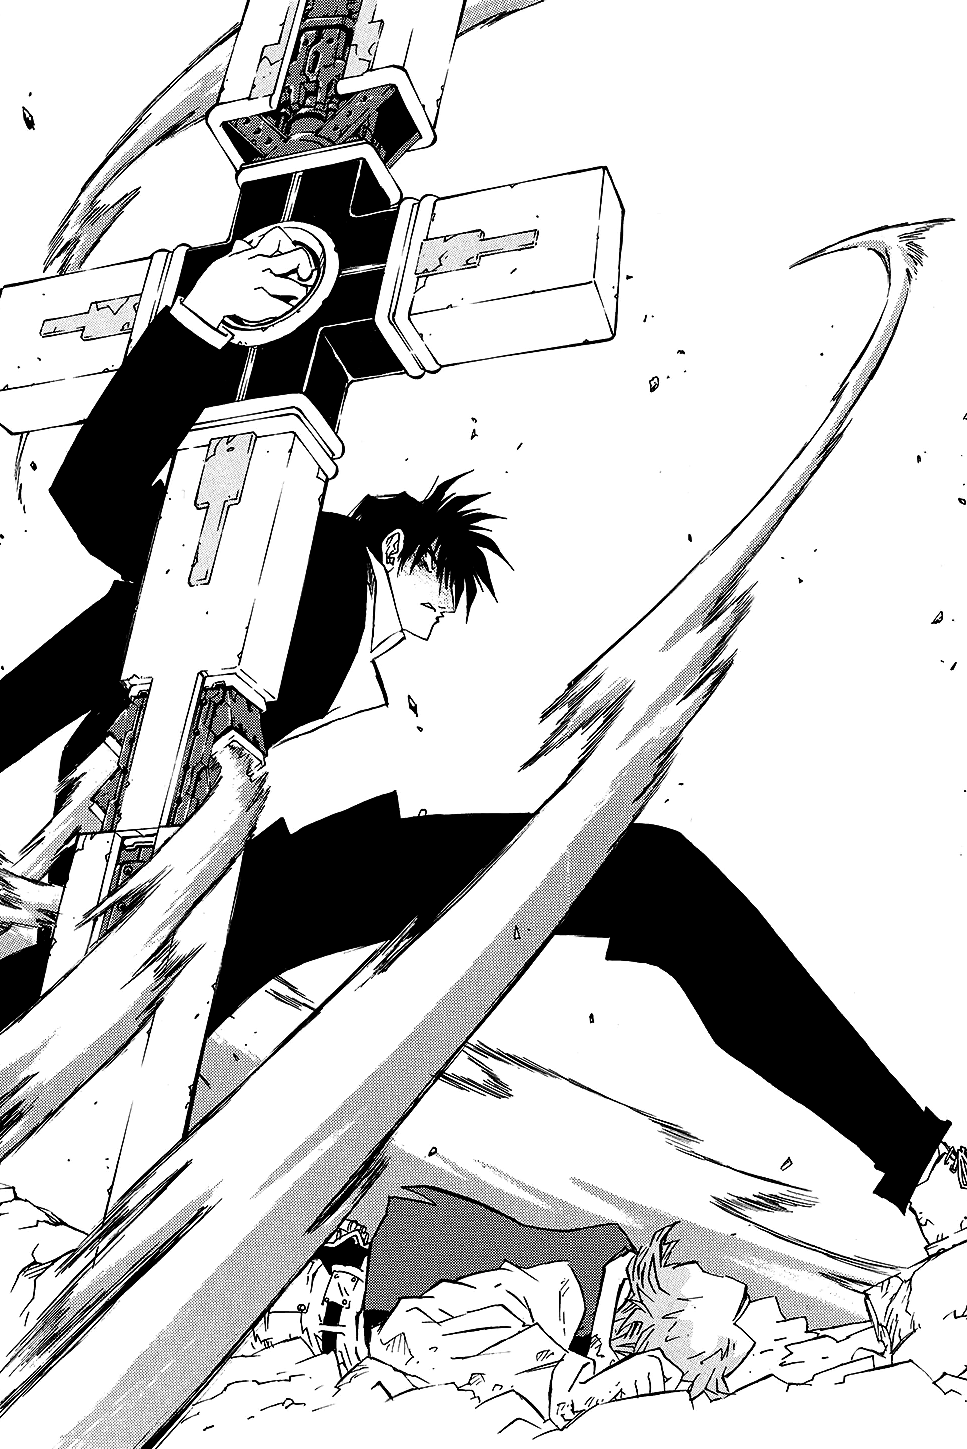 wolfwood swings up the punisher to protect someone